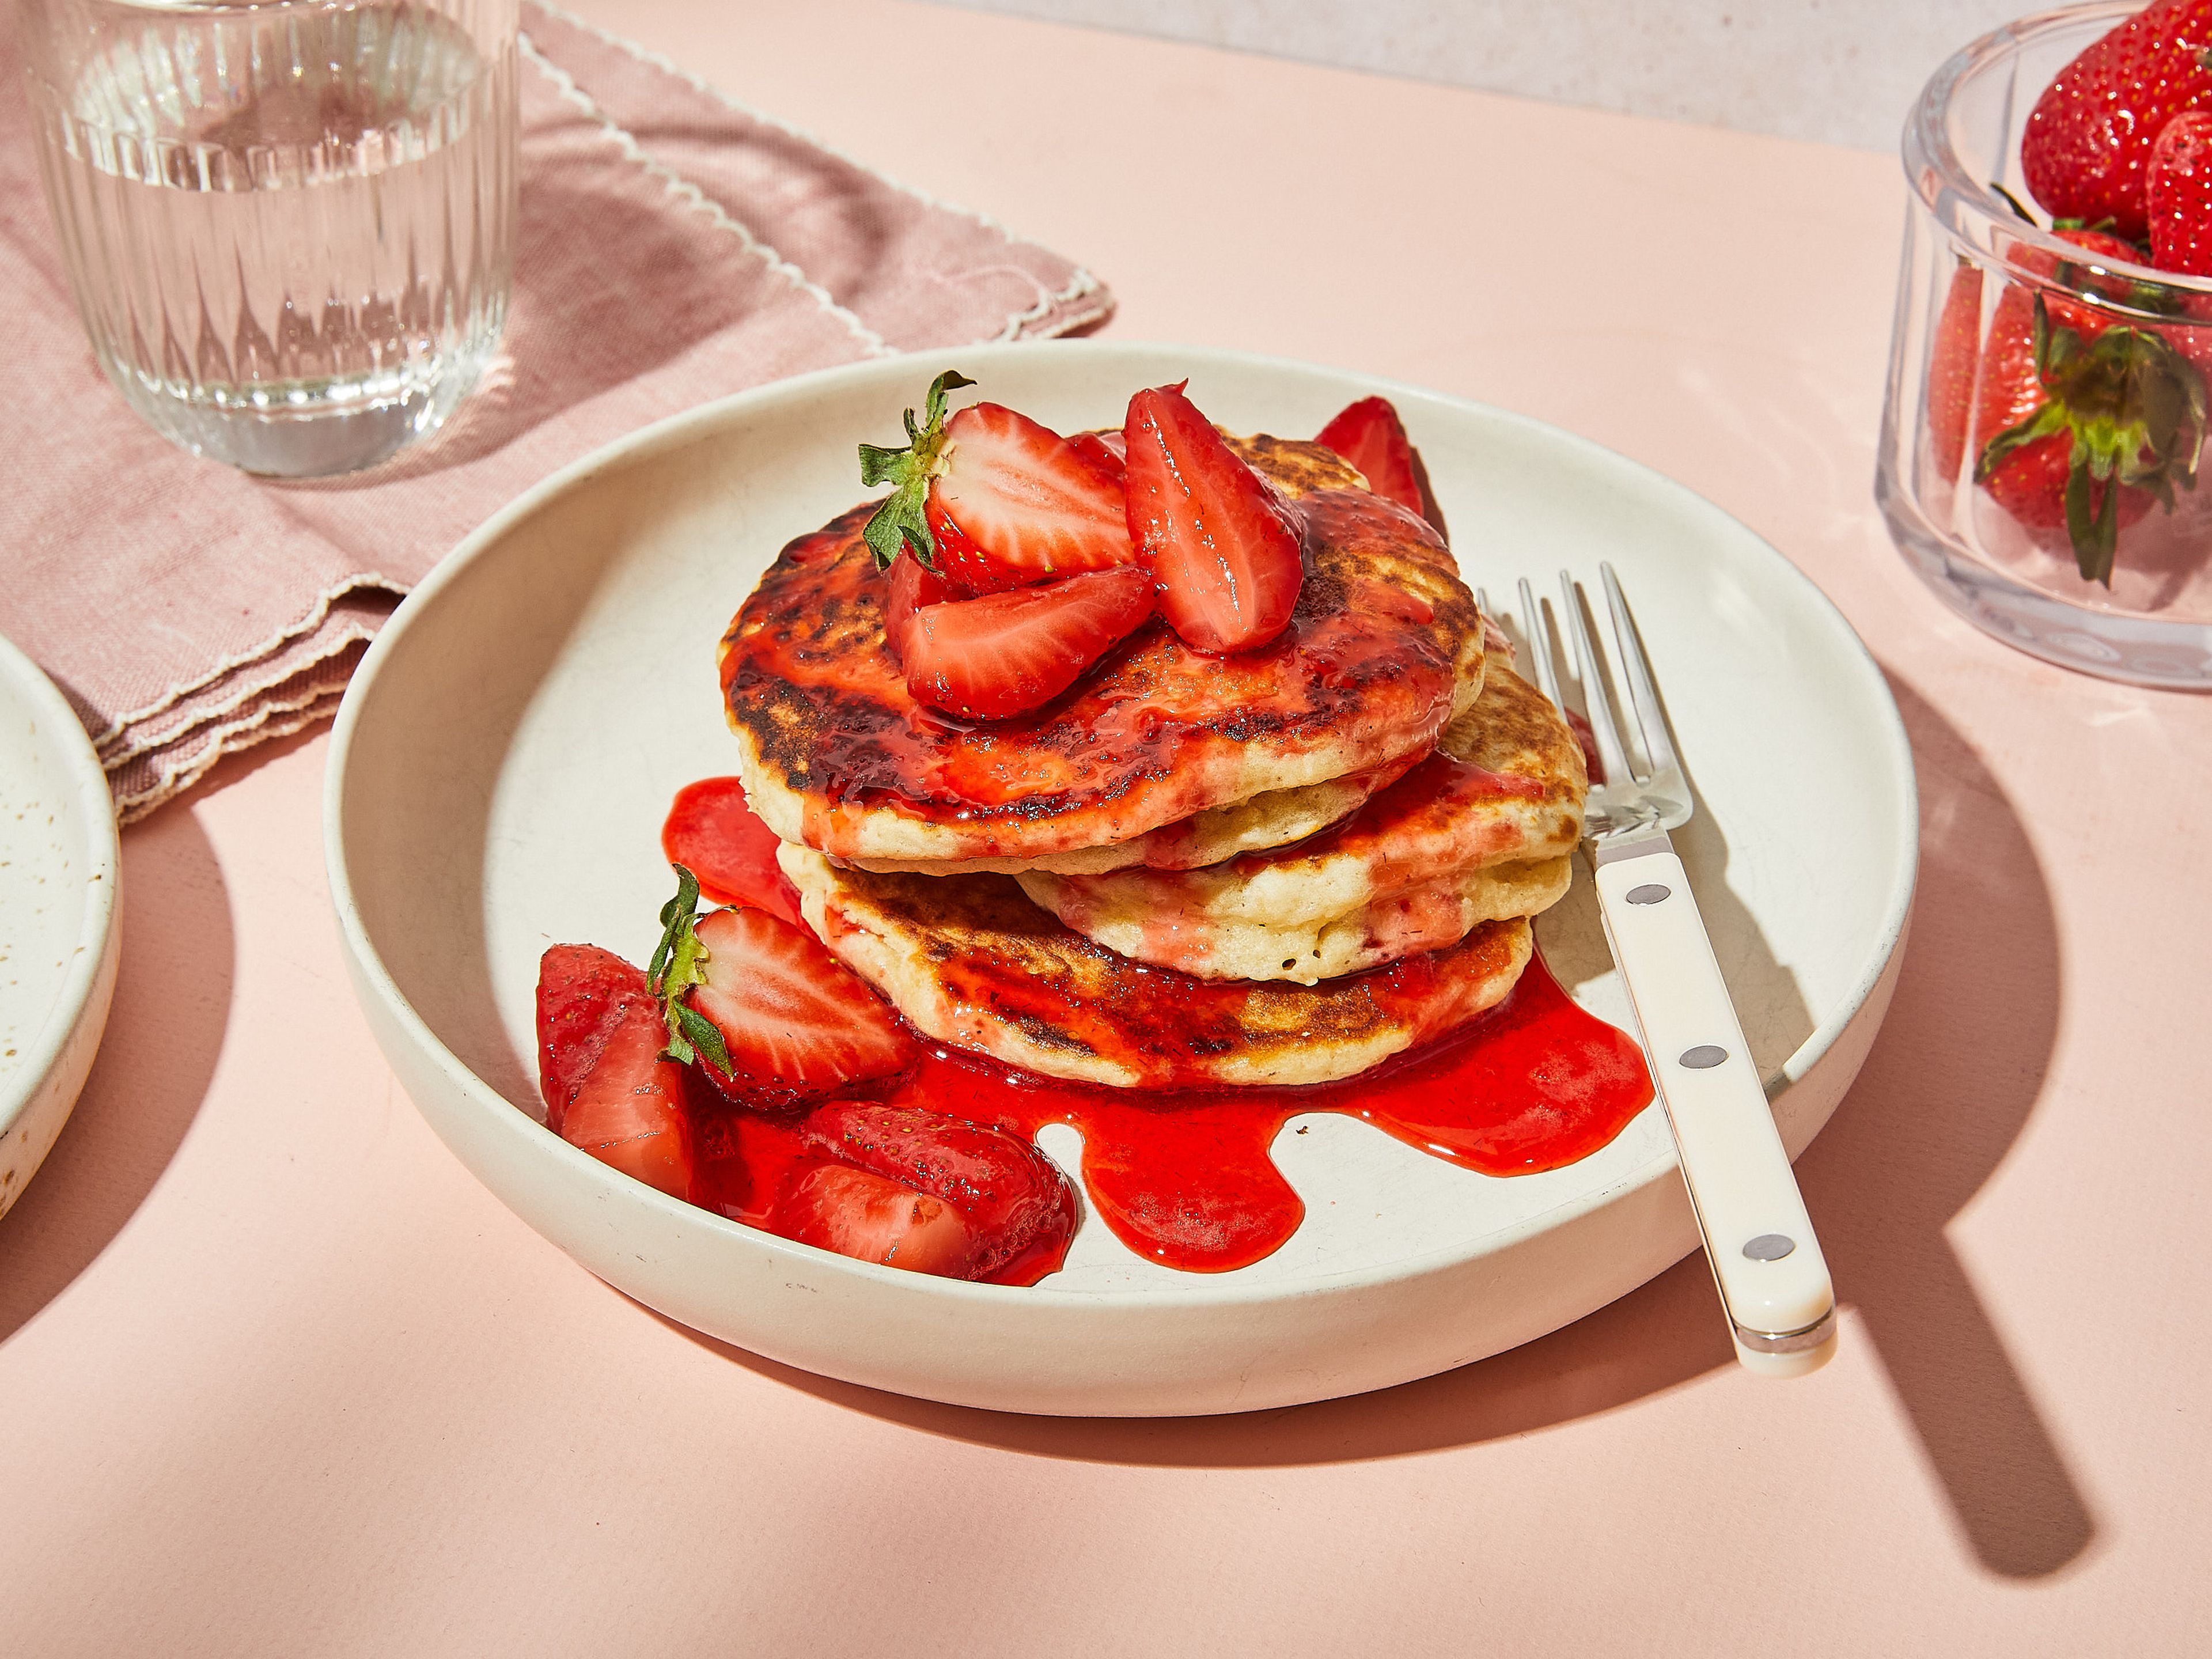 Oat pancakes with fresh strawberry sauce